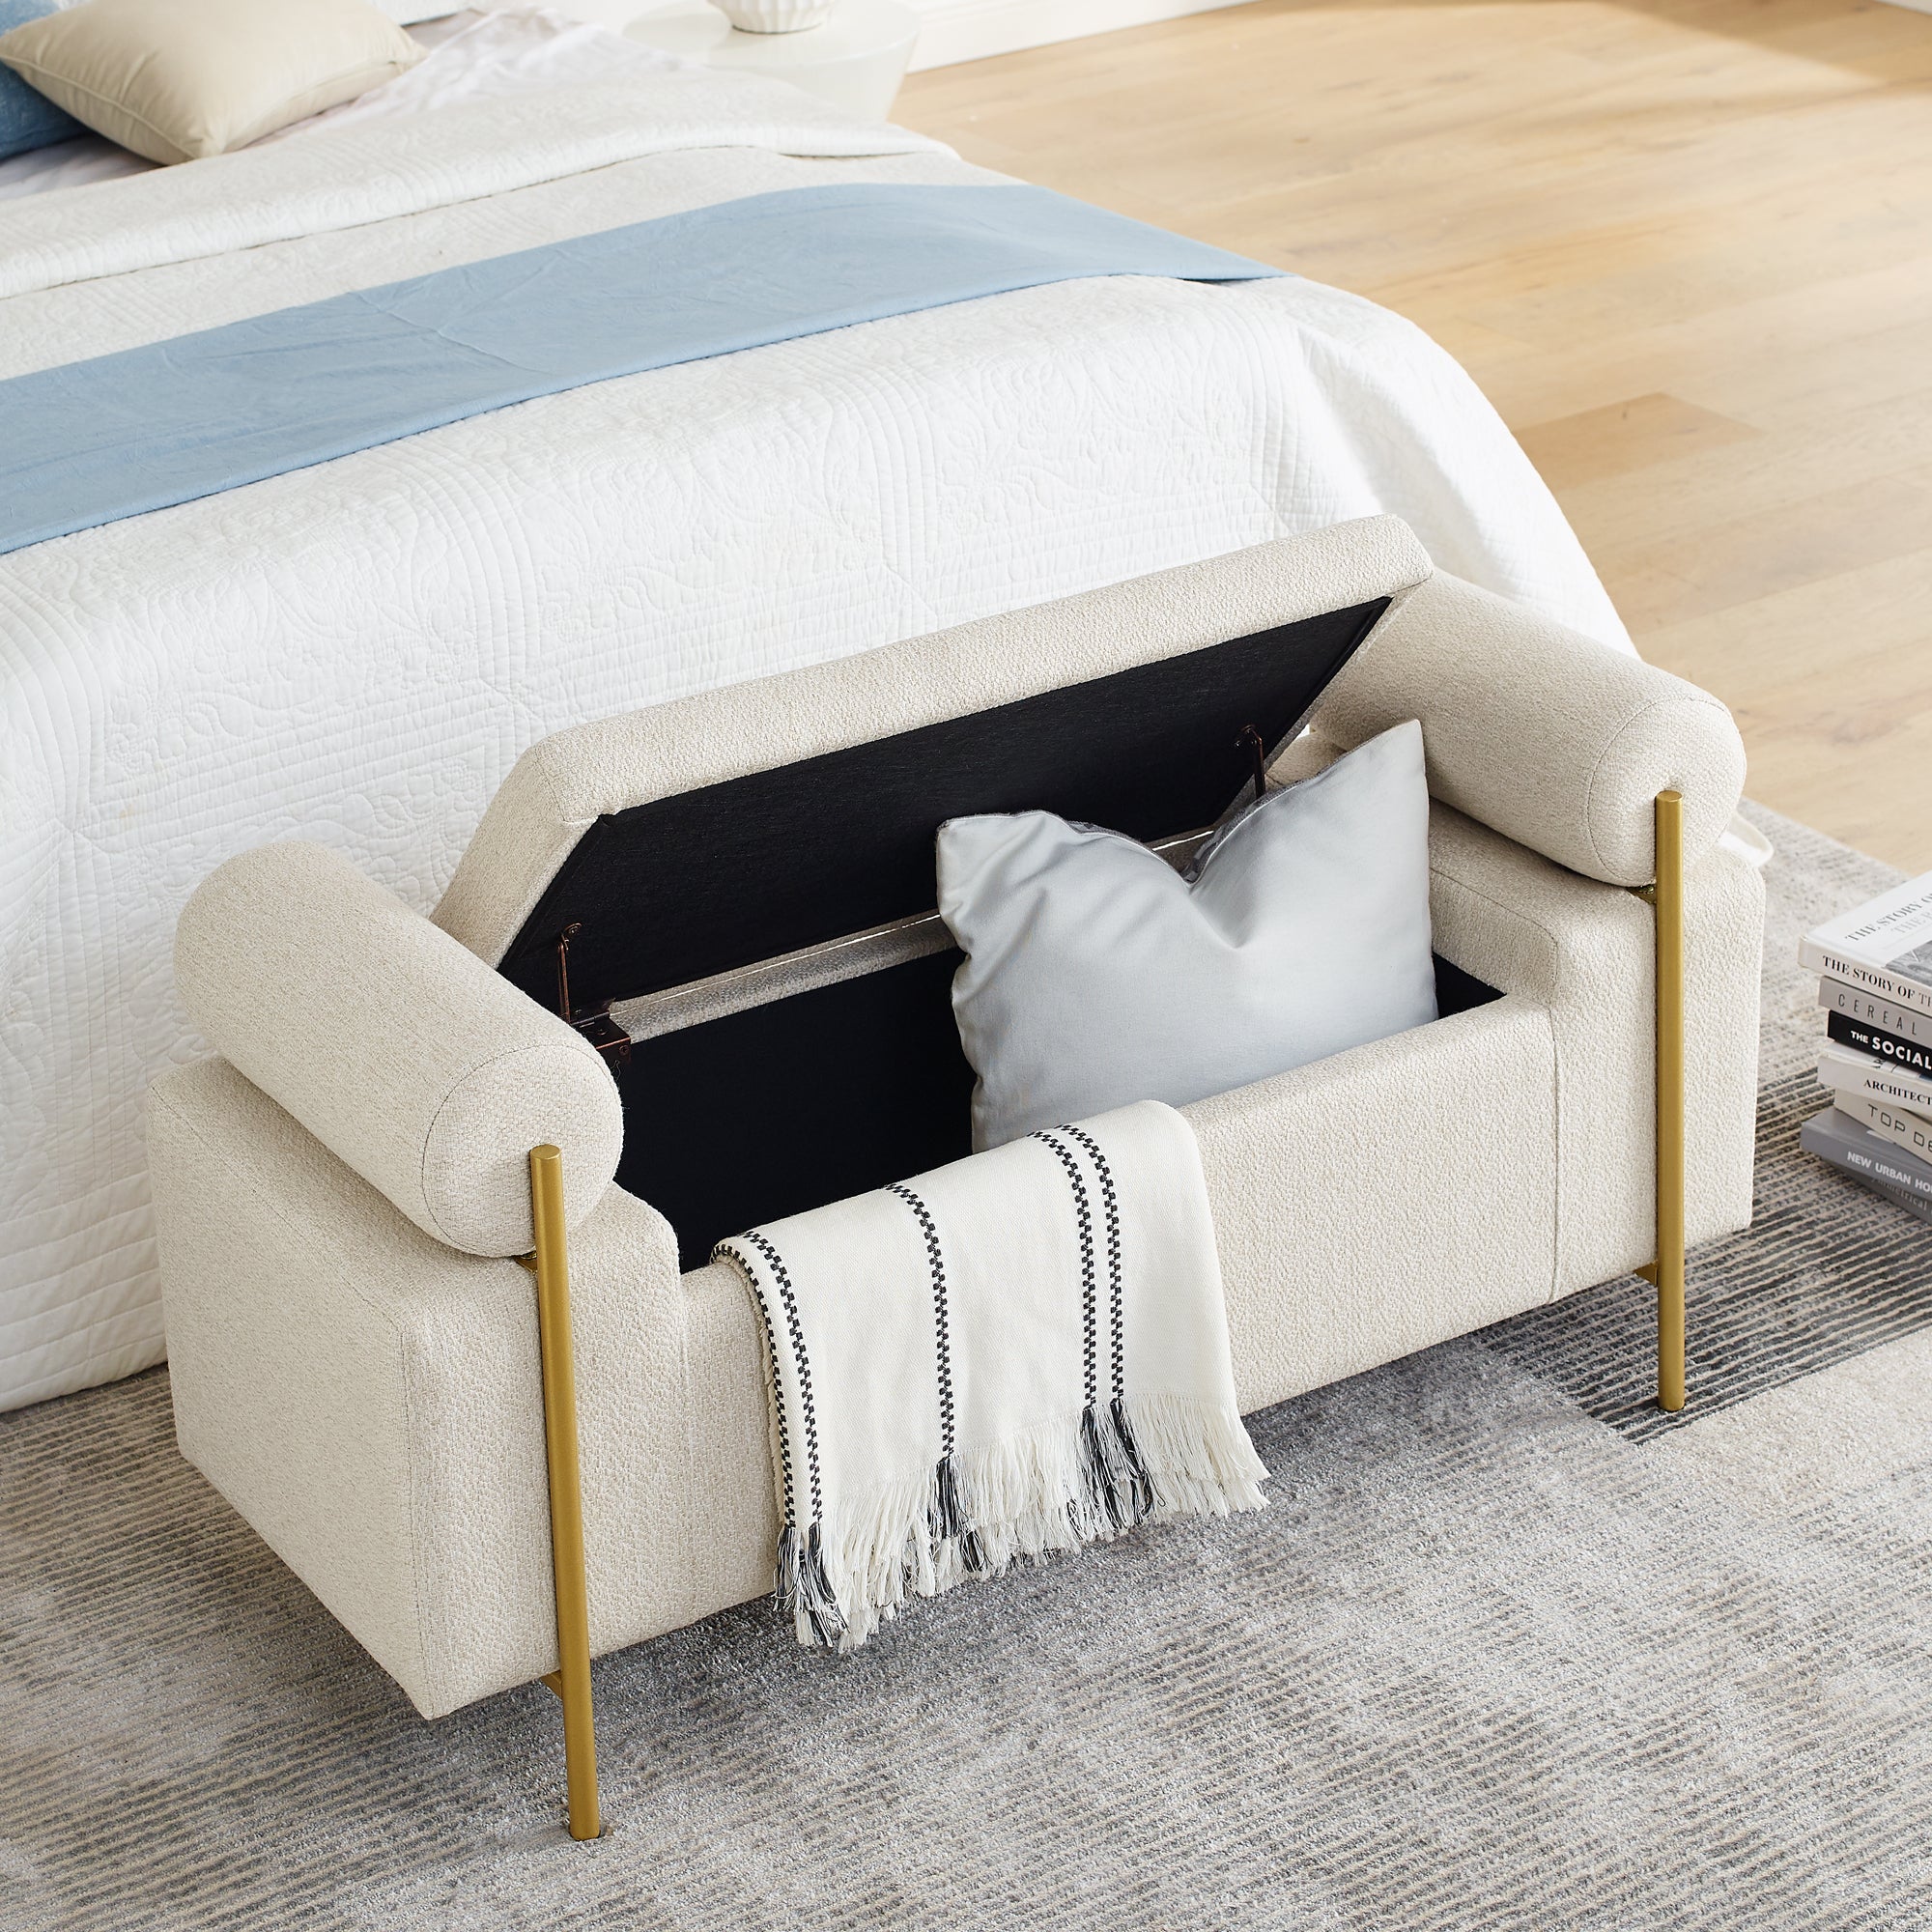 Upholstered Beige Linen Storage Bench with Cylindrical Arms and Iron Legs